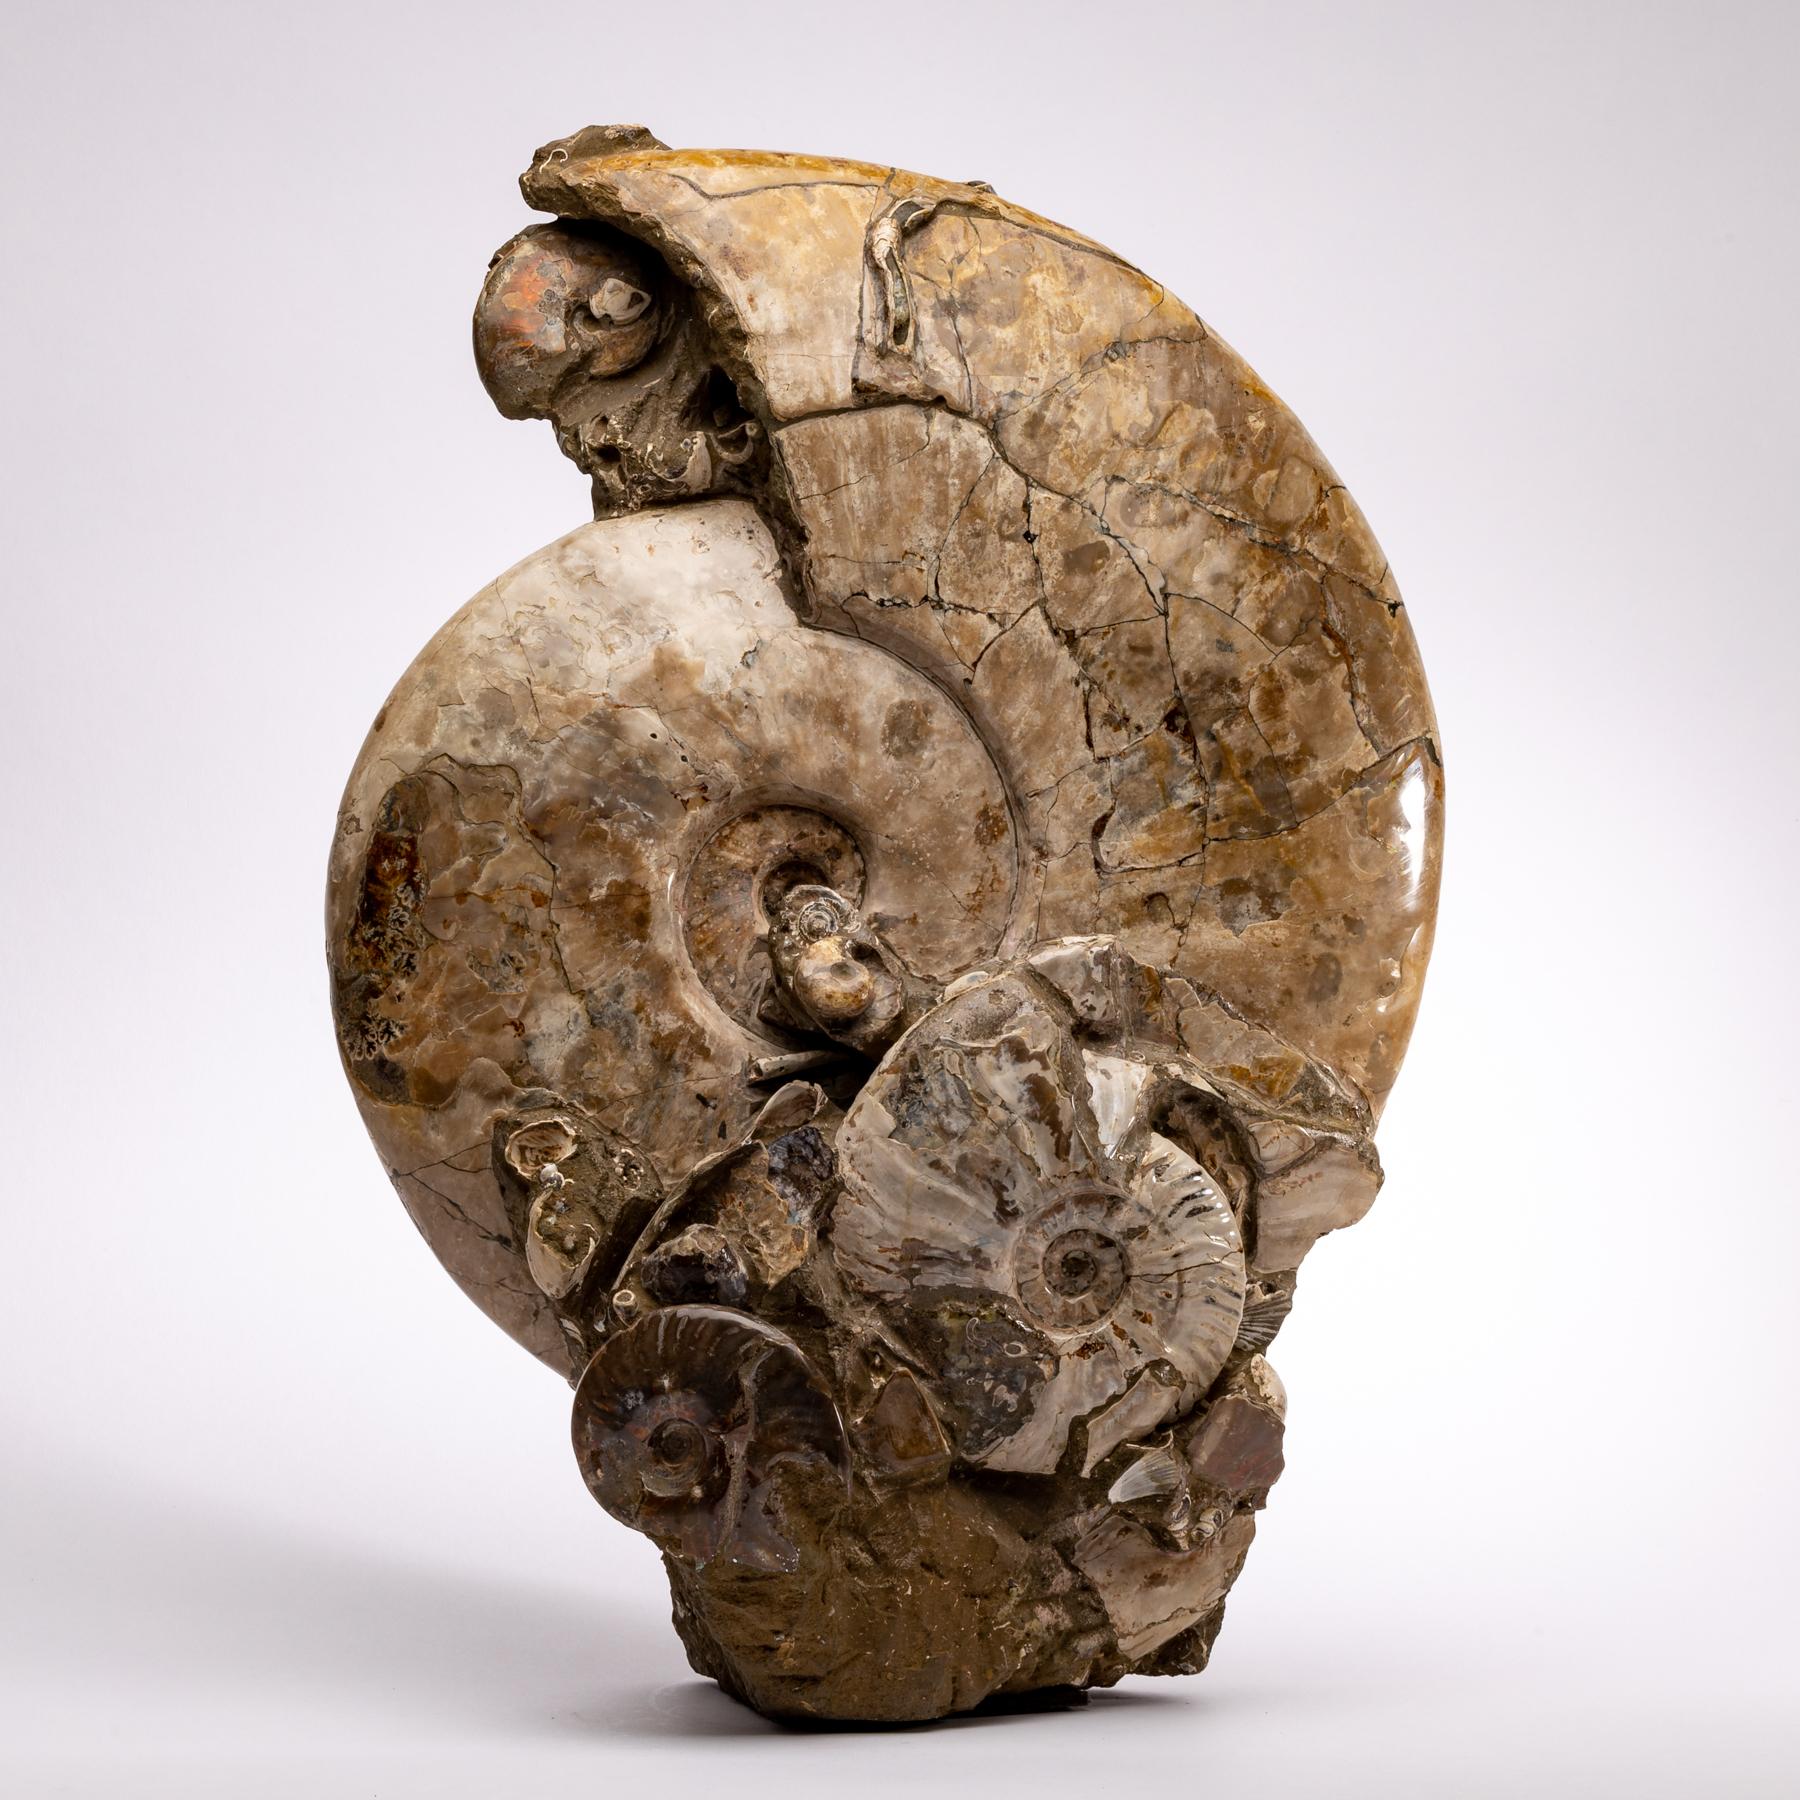 Contemporary Free Standing Fossil Ammonite Cluster from Madagascar, Cretaceous Period